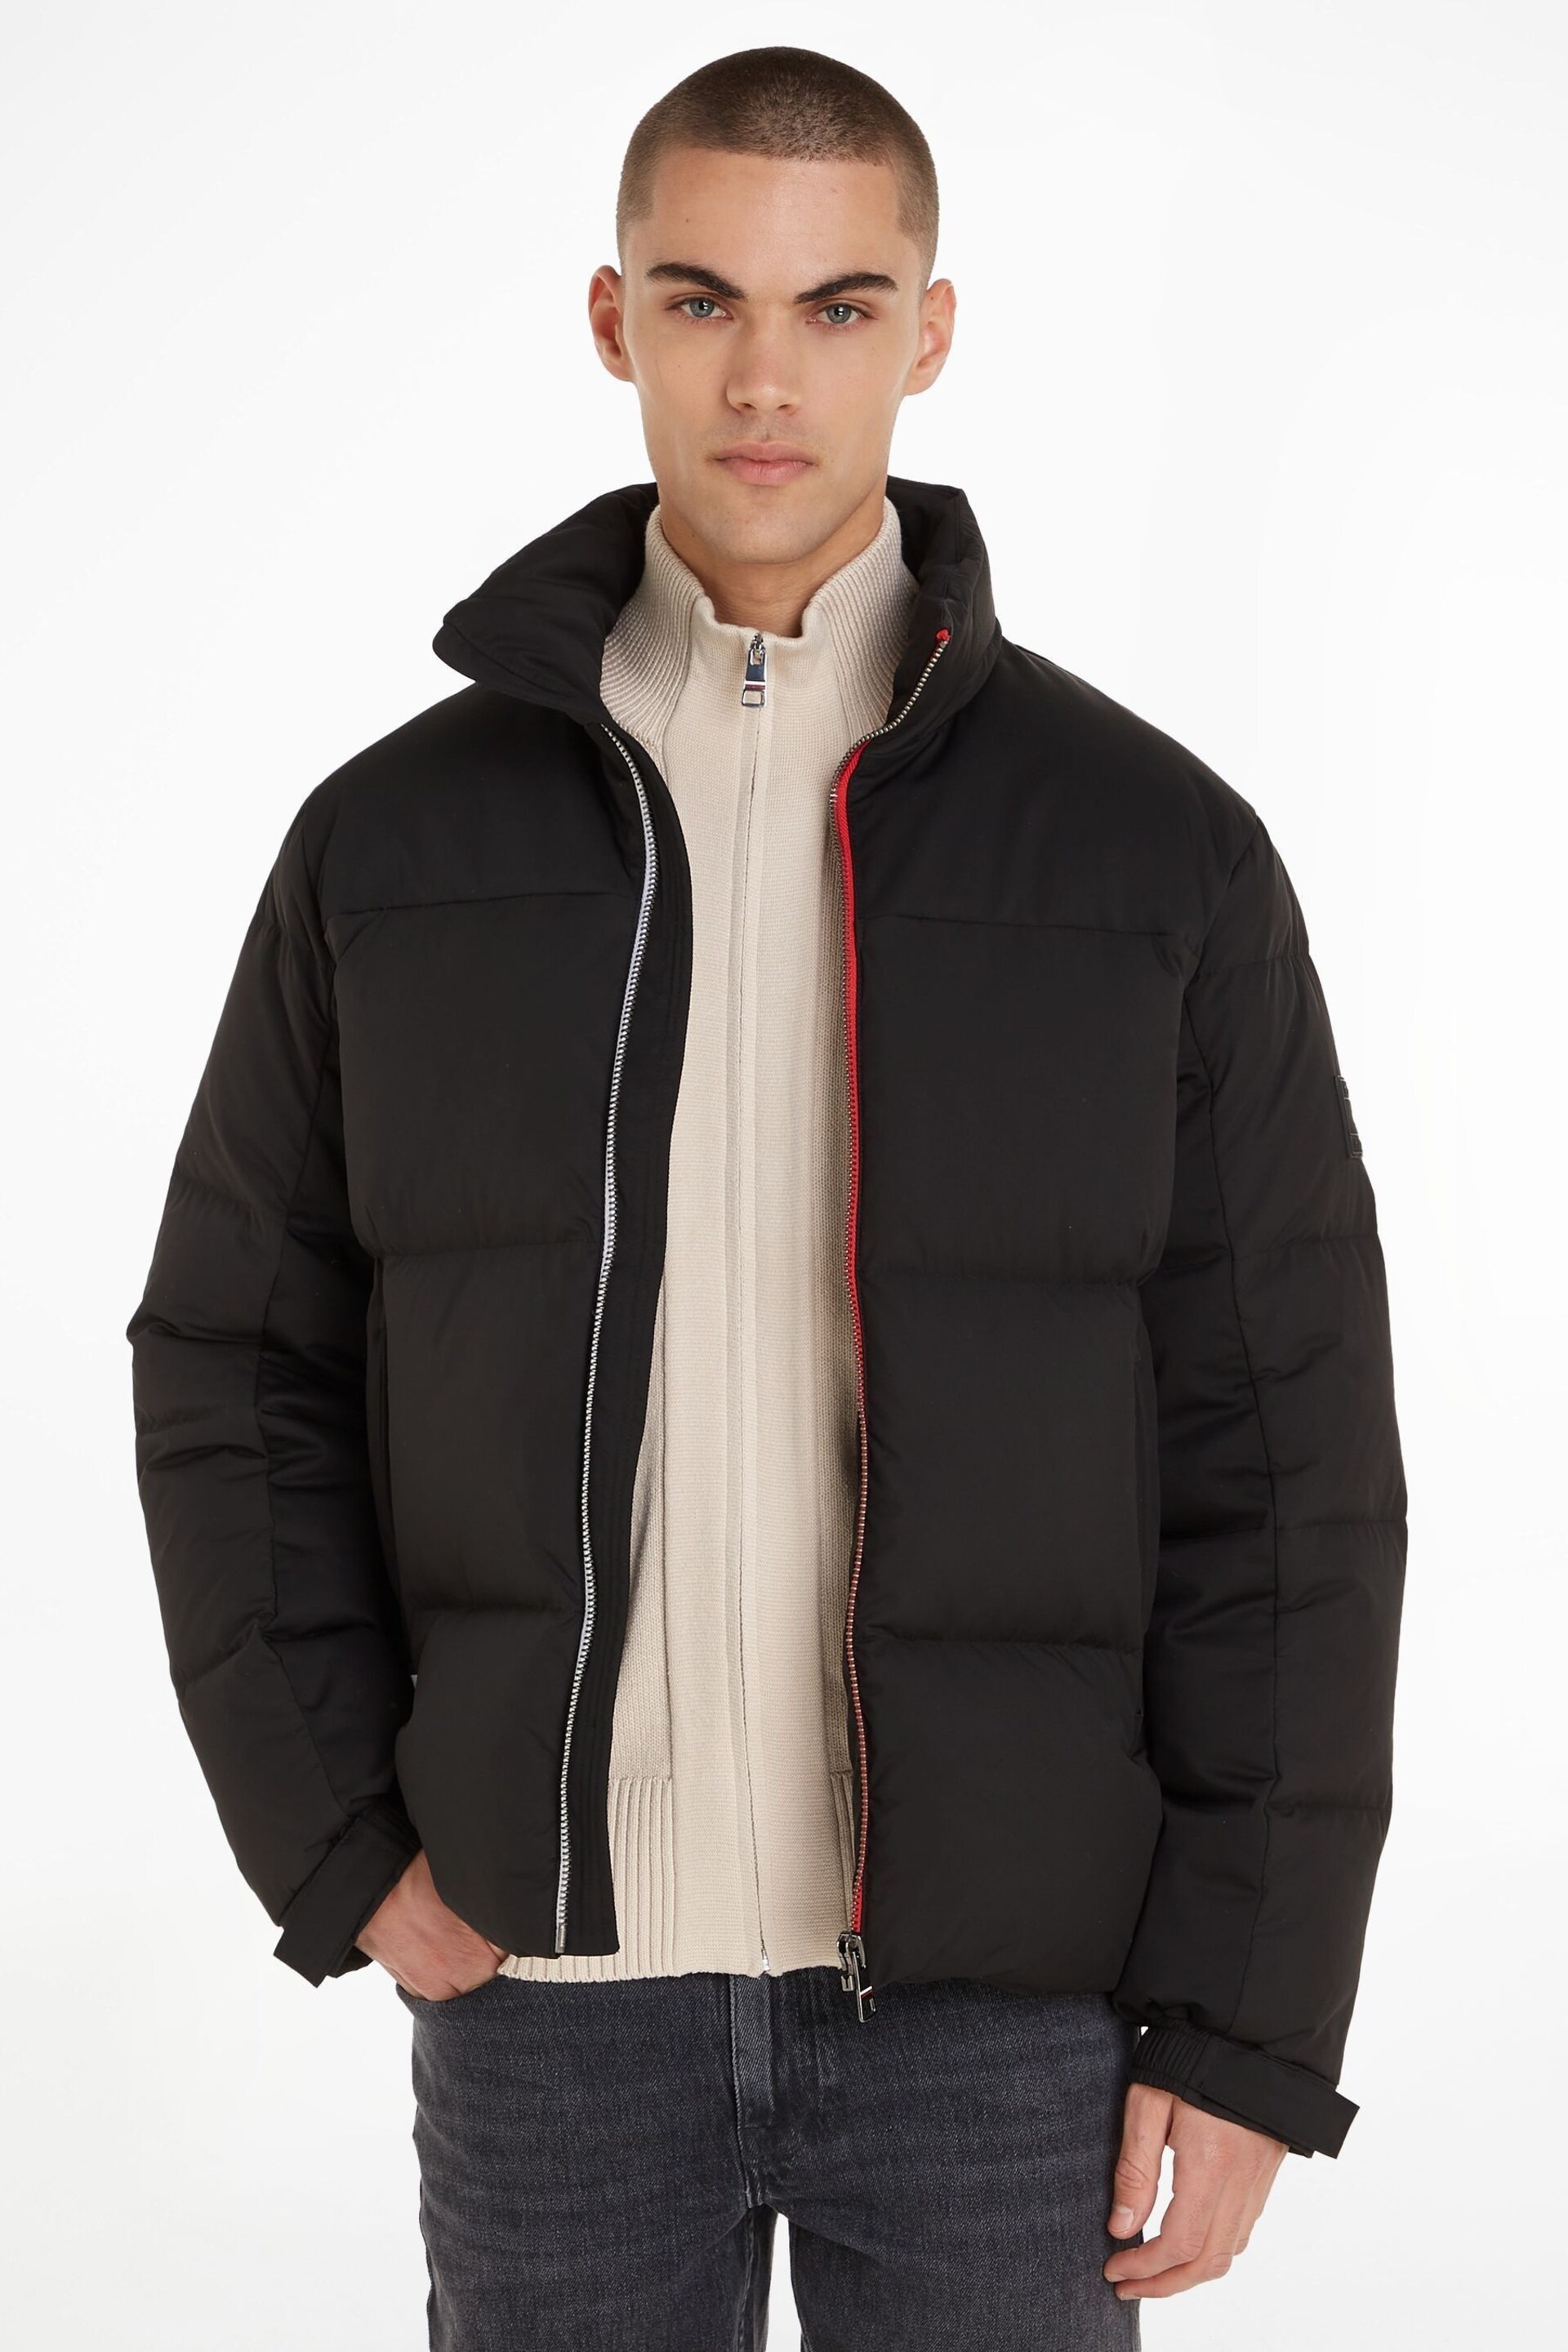 Tommy Hilfiger New York Down Puffer Black Jacket - Image 1 of 4